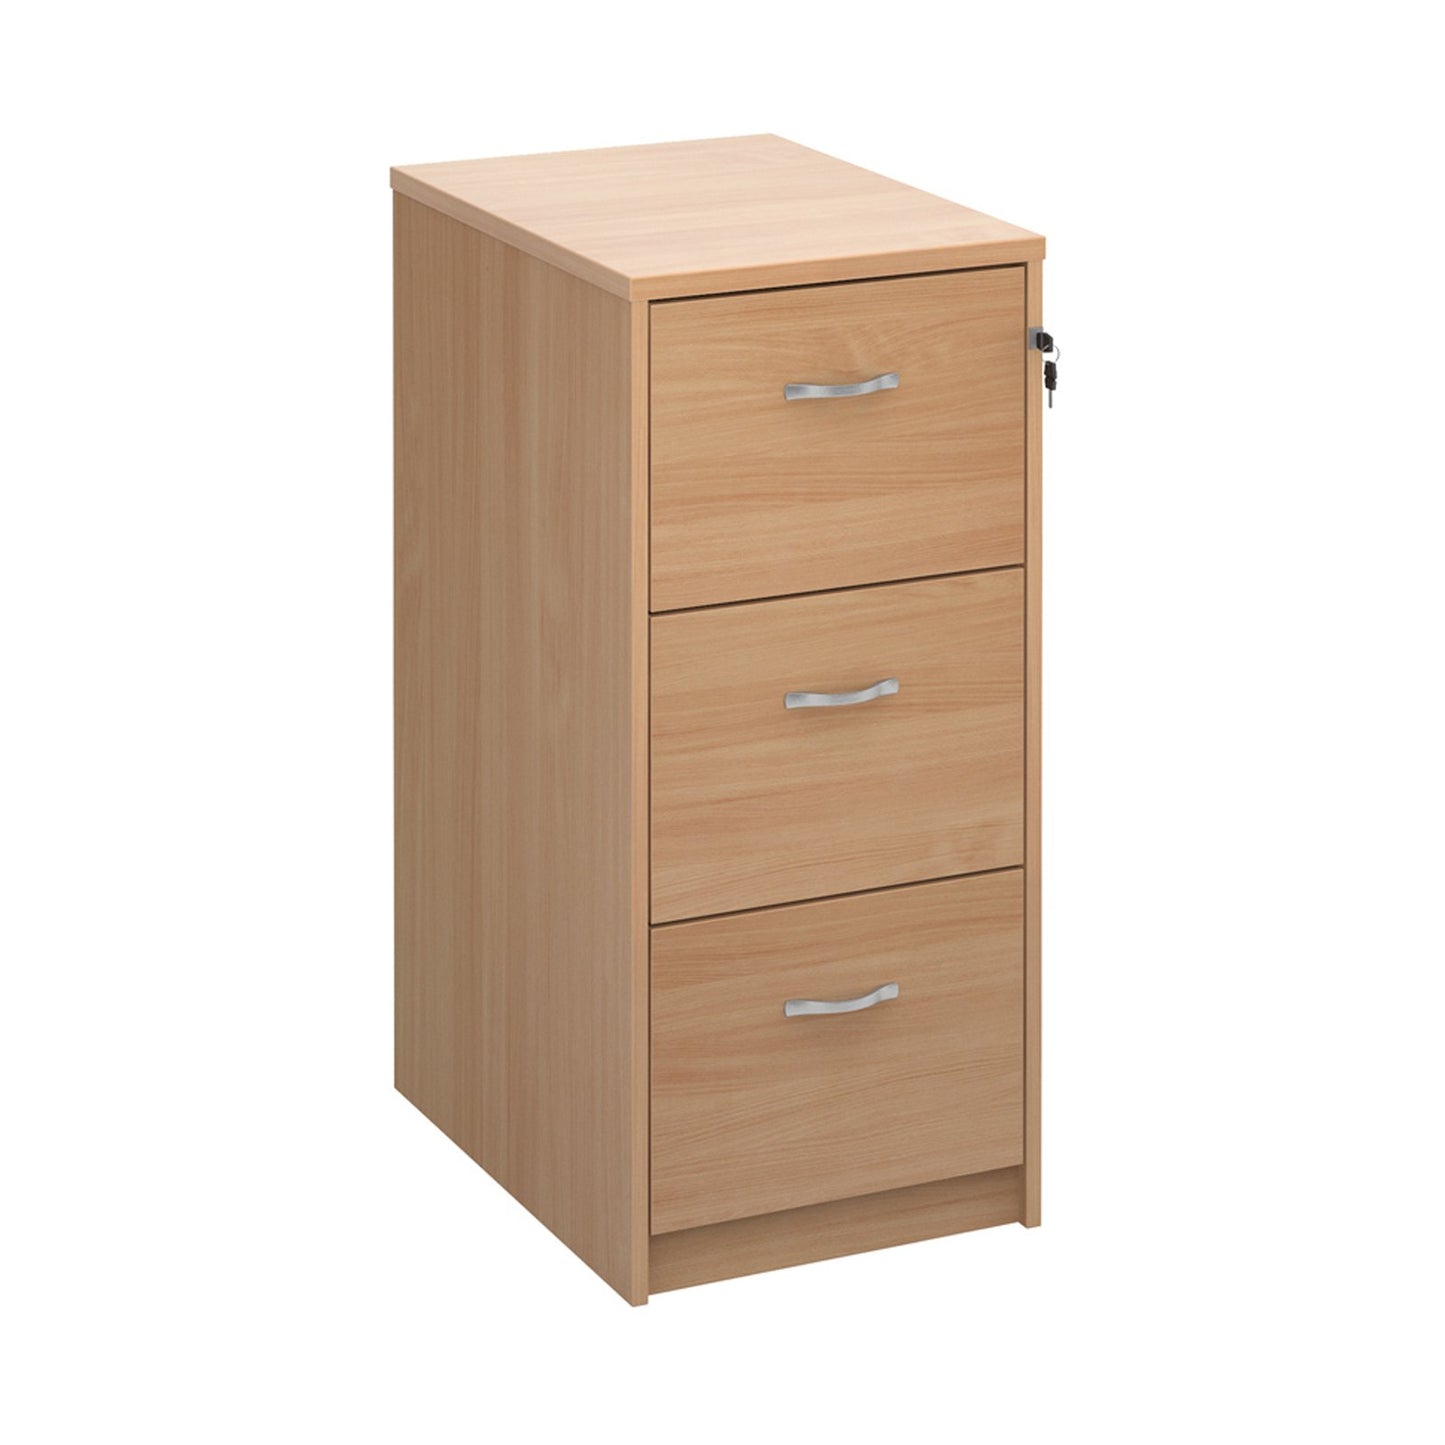 Wooden Filing Cabinet With Silver Handles - 2 Drawer - White